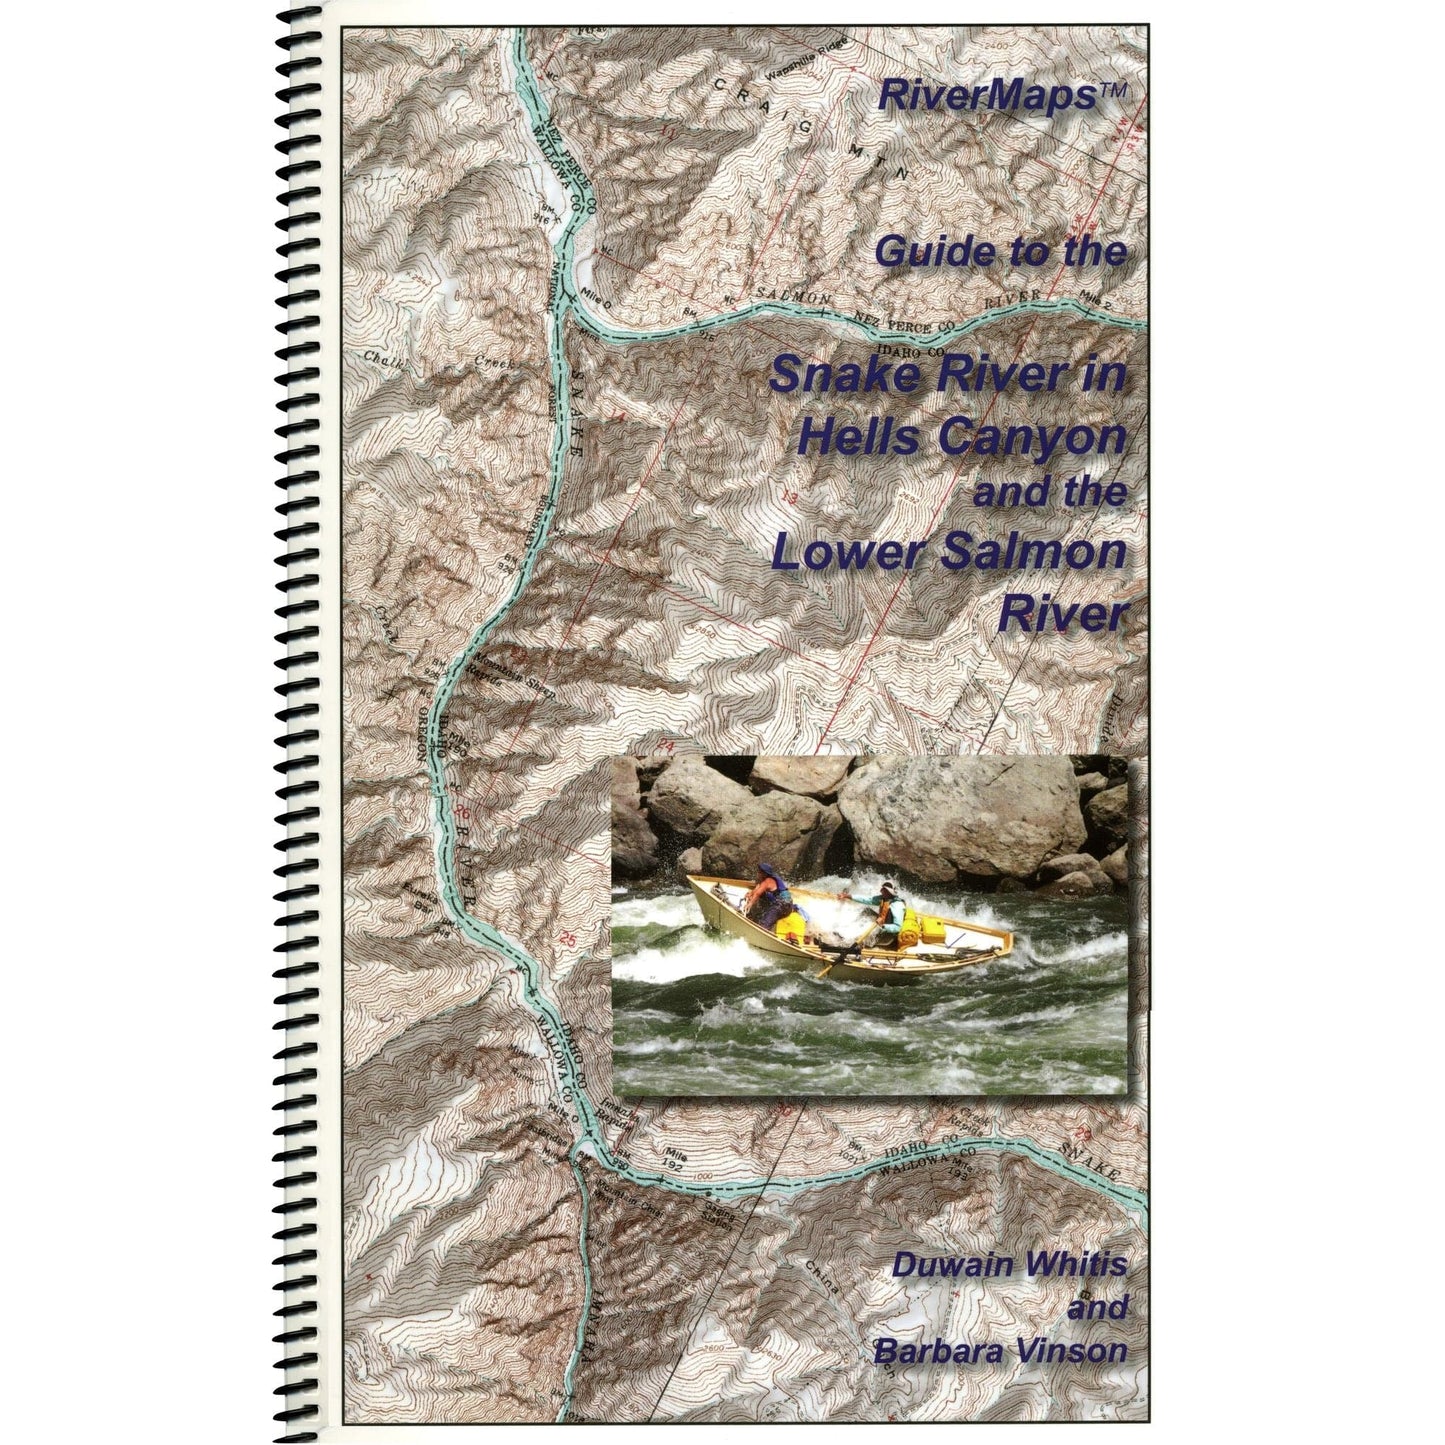 Featuring the Snake & Lower Salmon River Guide Book guide book manufactured by Rivermaps shown here from one angle.